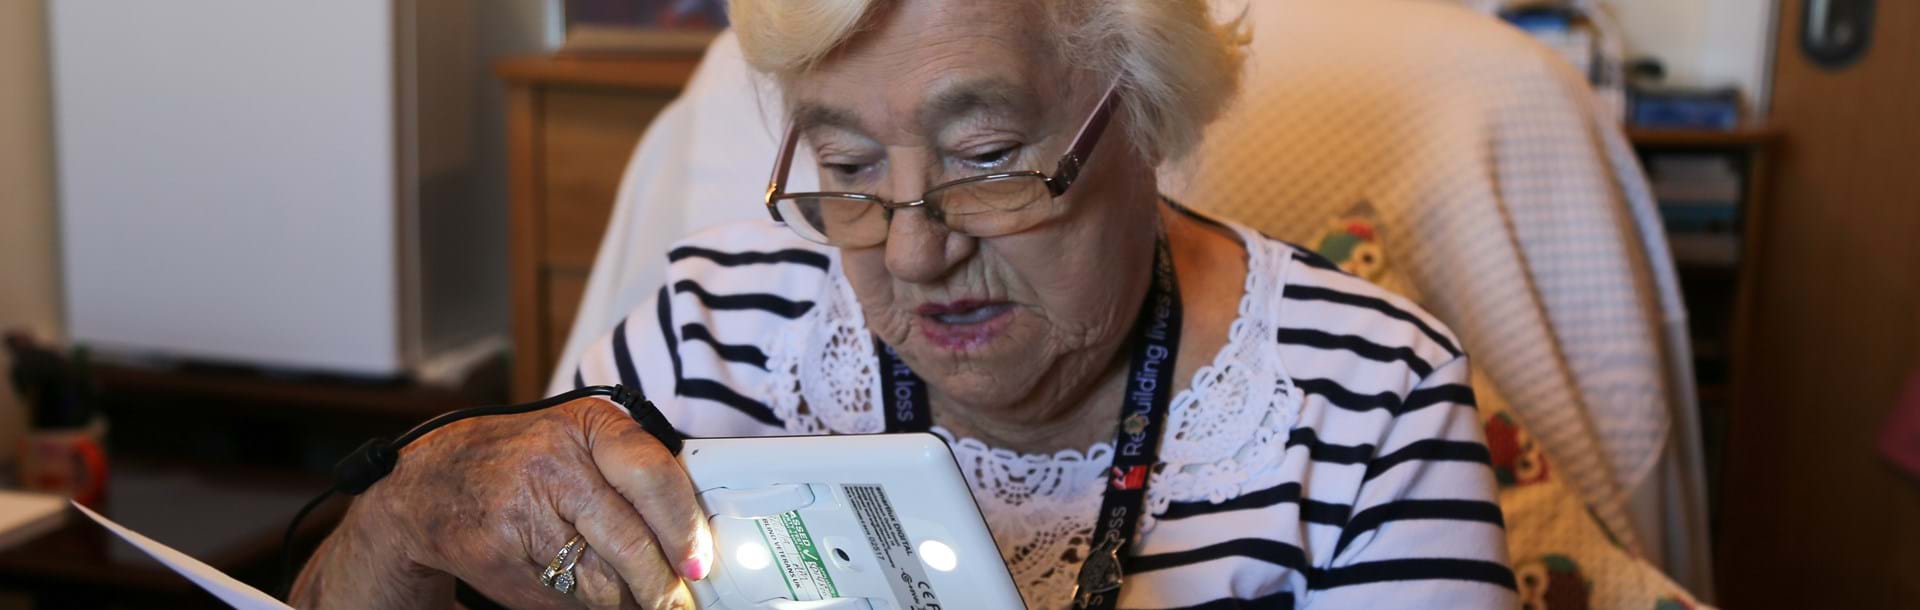 Blind veteran Win holding a device which she is using to look at old photographs 